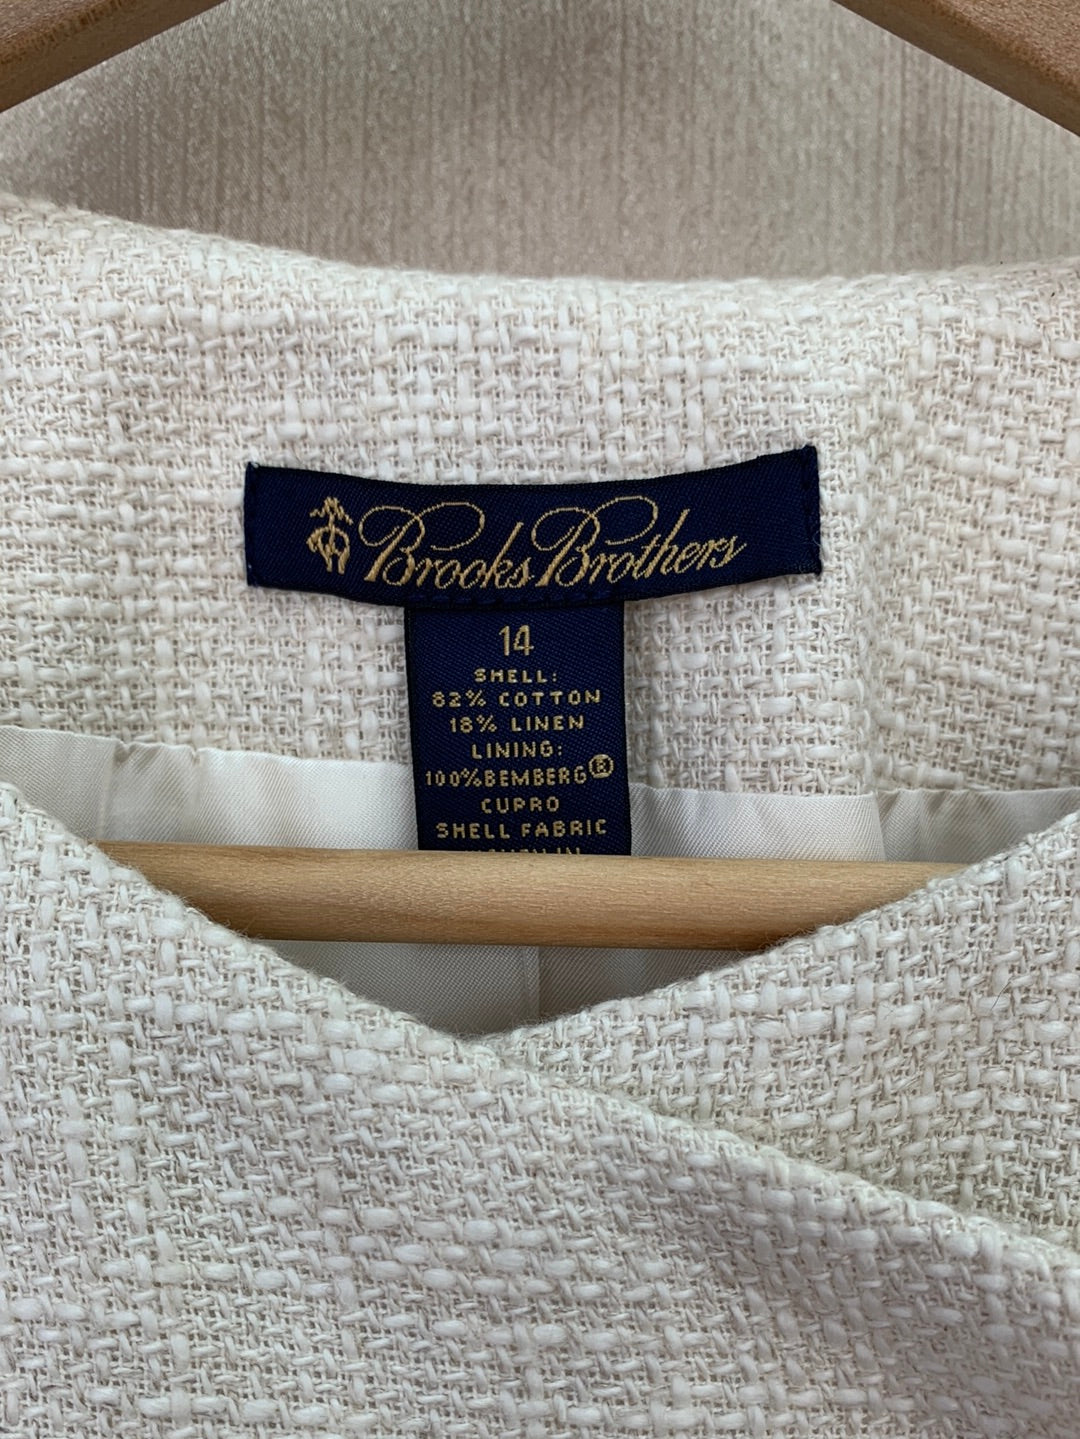 NWT - BROOKS BROTHERS cream Cotton Linen Boucle Tweed Jacket - 14